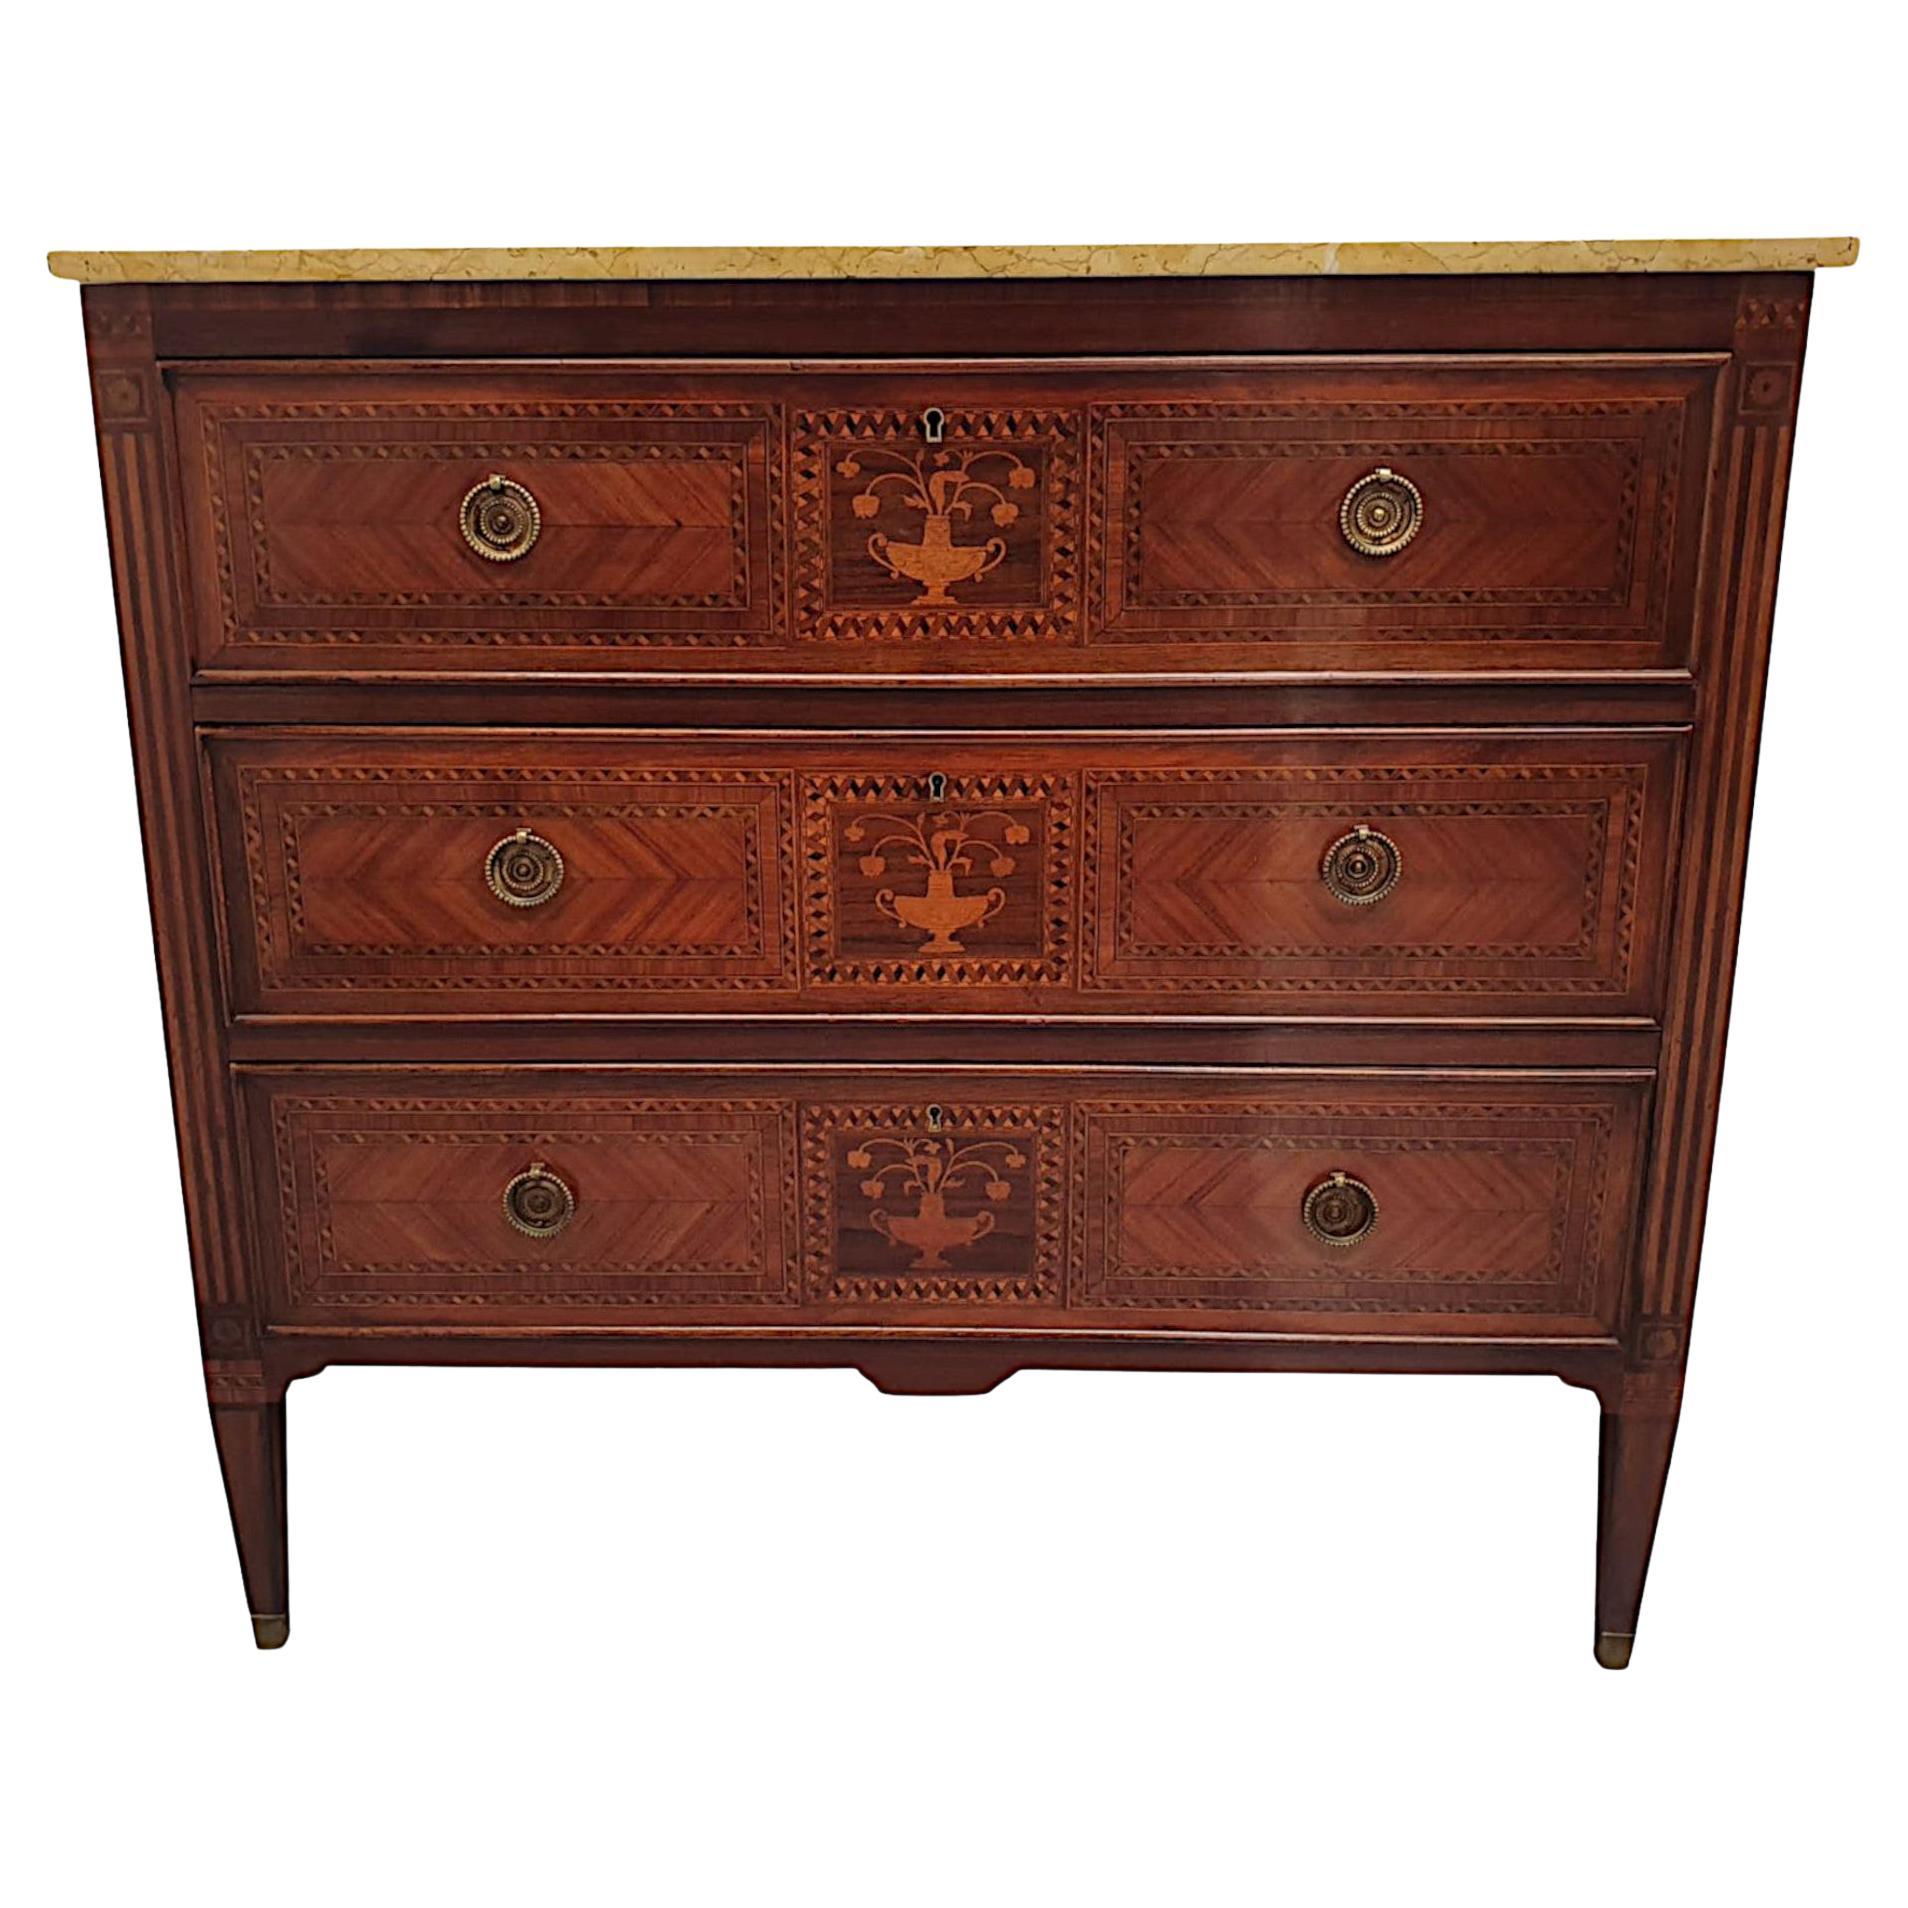 A Fine Early 20th Century Highly Inlaid Marble Top Chest of Drawers For Sale